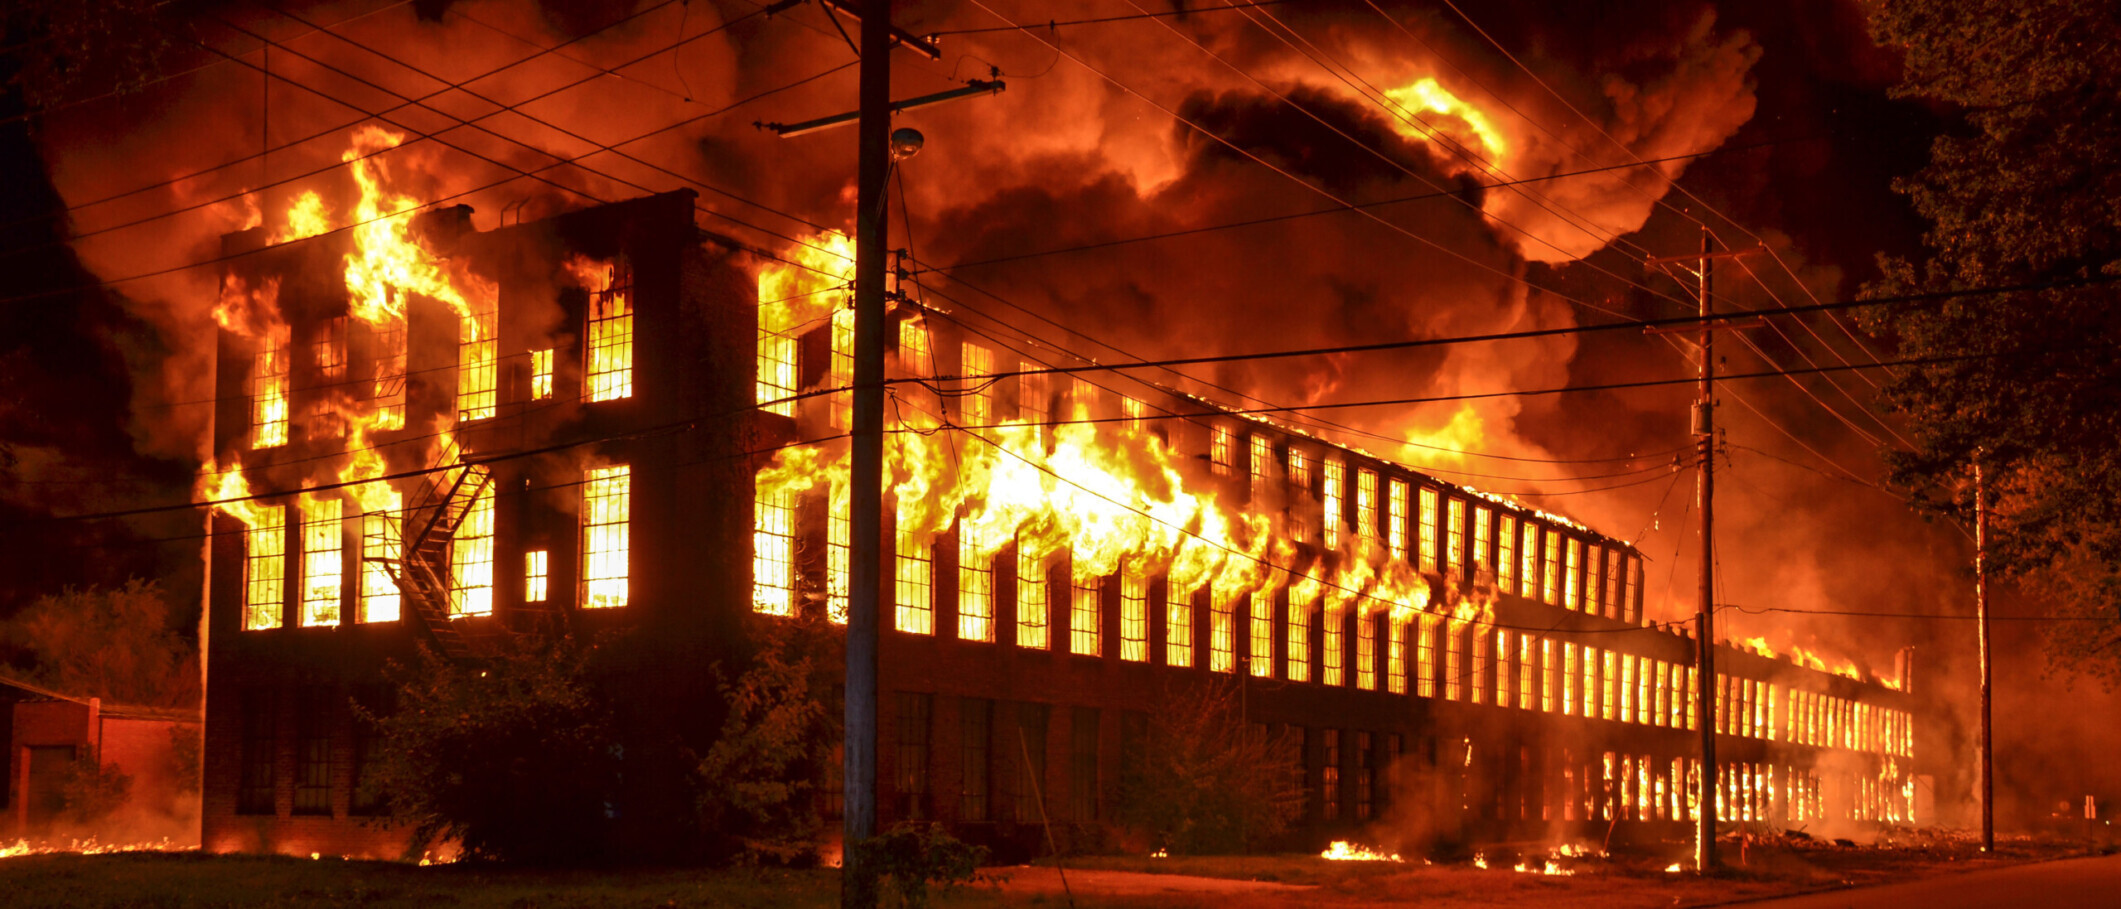 Old factory on fire at night